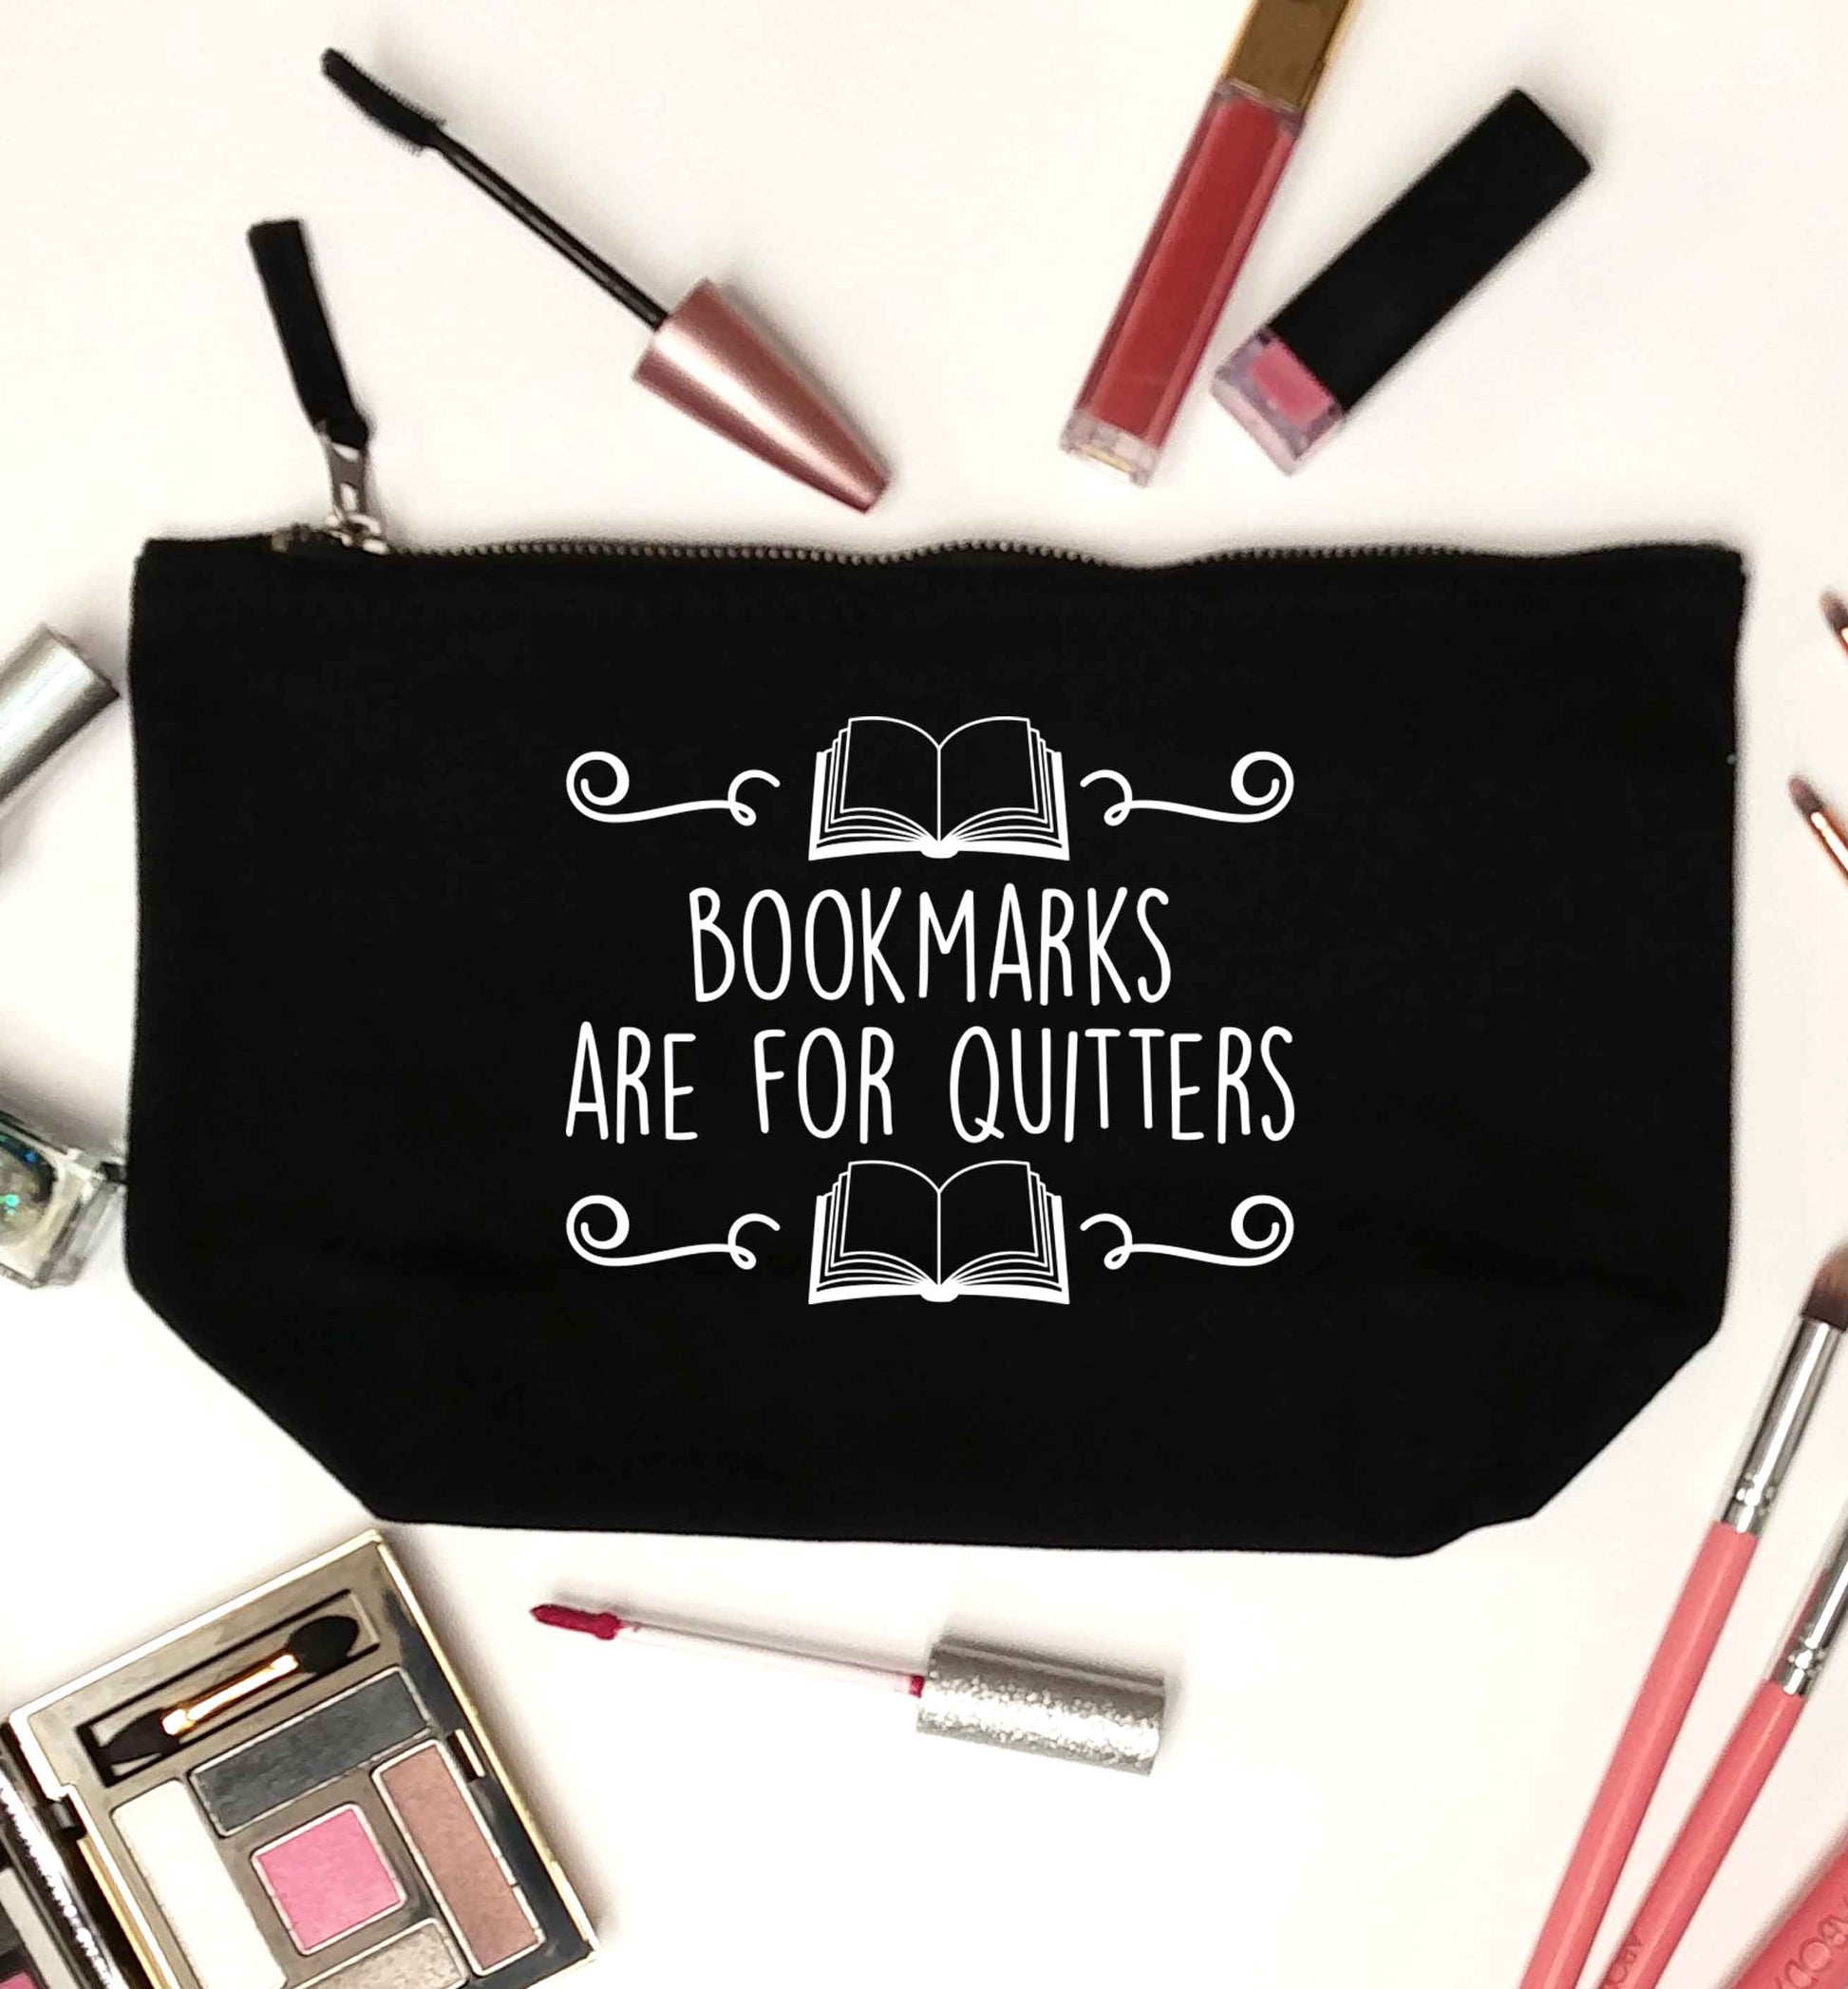 Bookmarks are for quitters black makeup bag